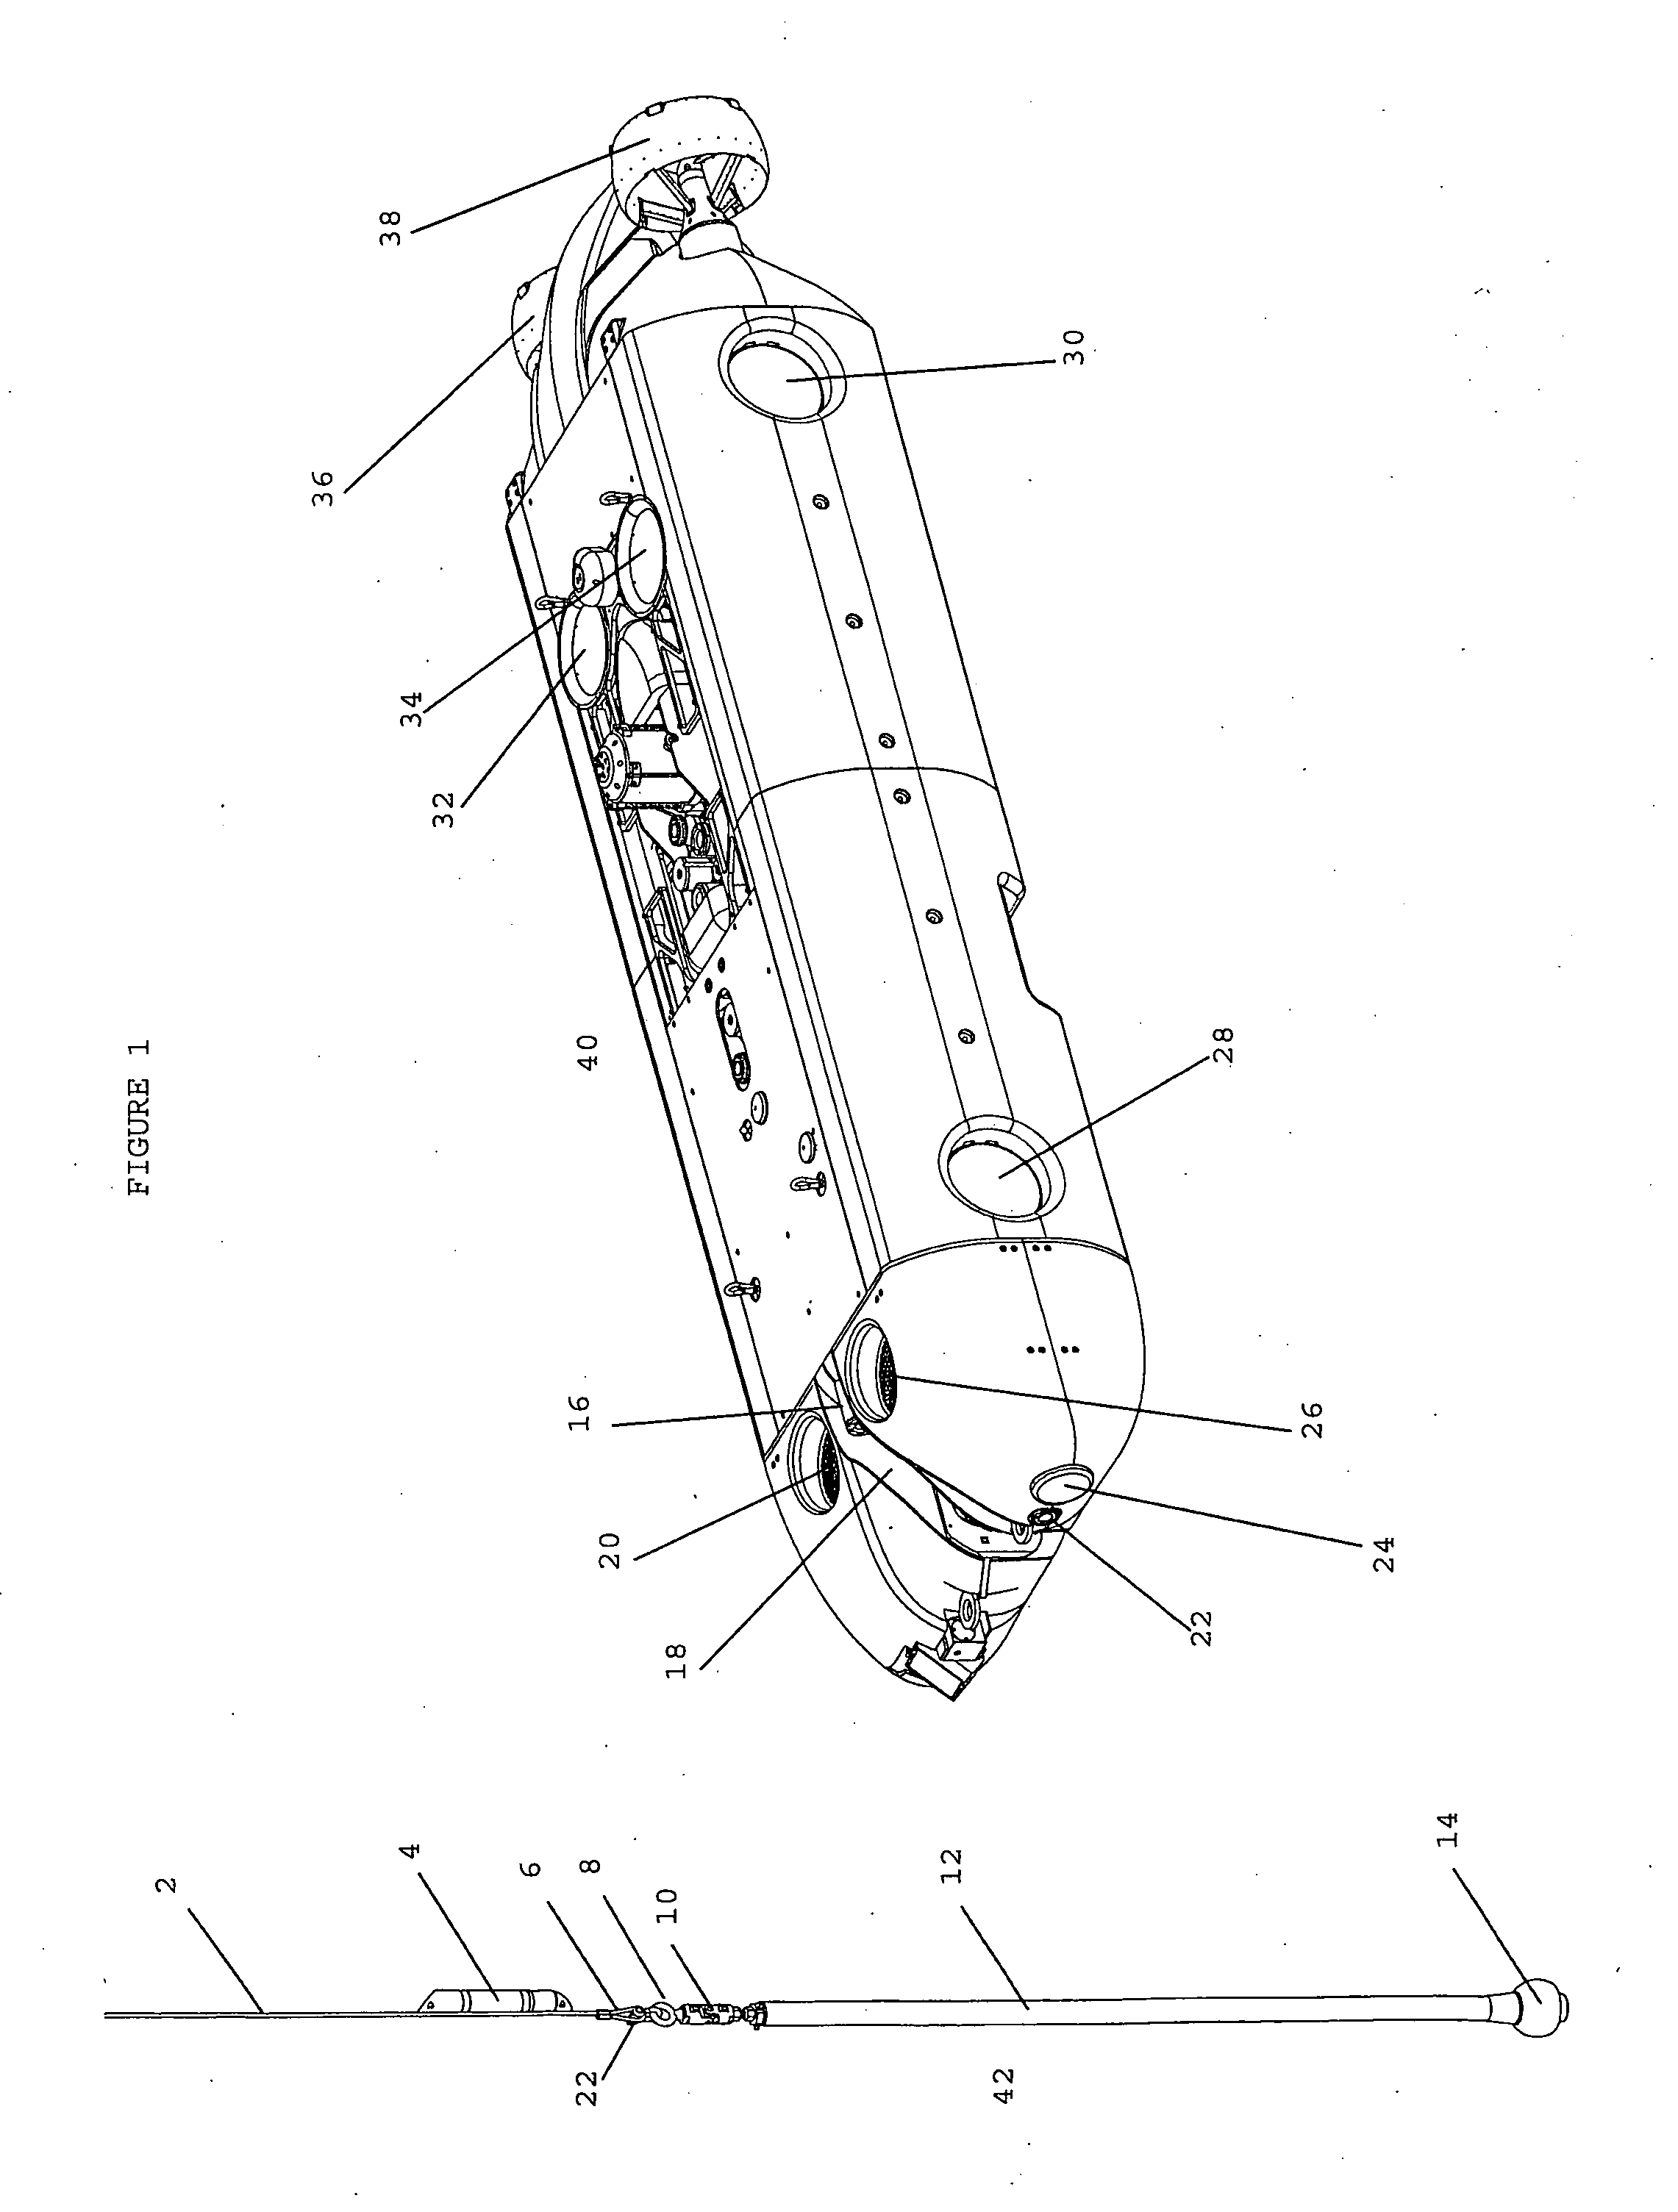 System and Method for Automated Rendezvous, Docking and Capture of Autonomous Underwater Vehicles